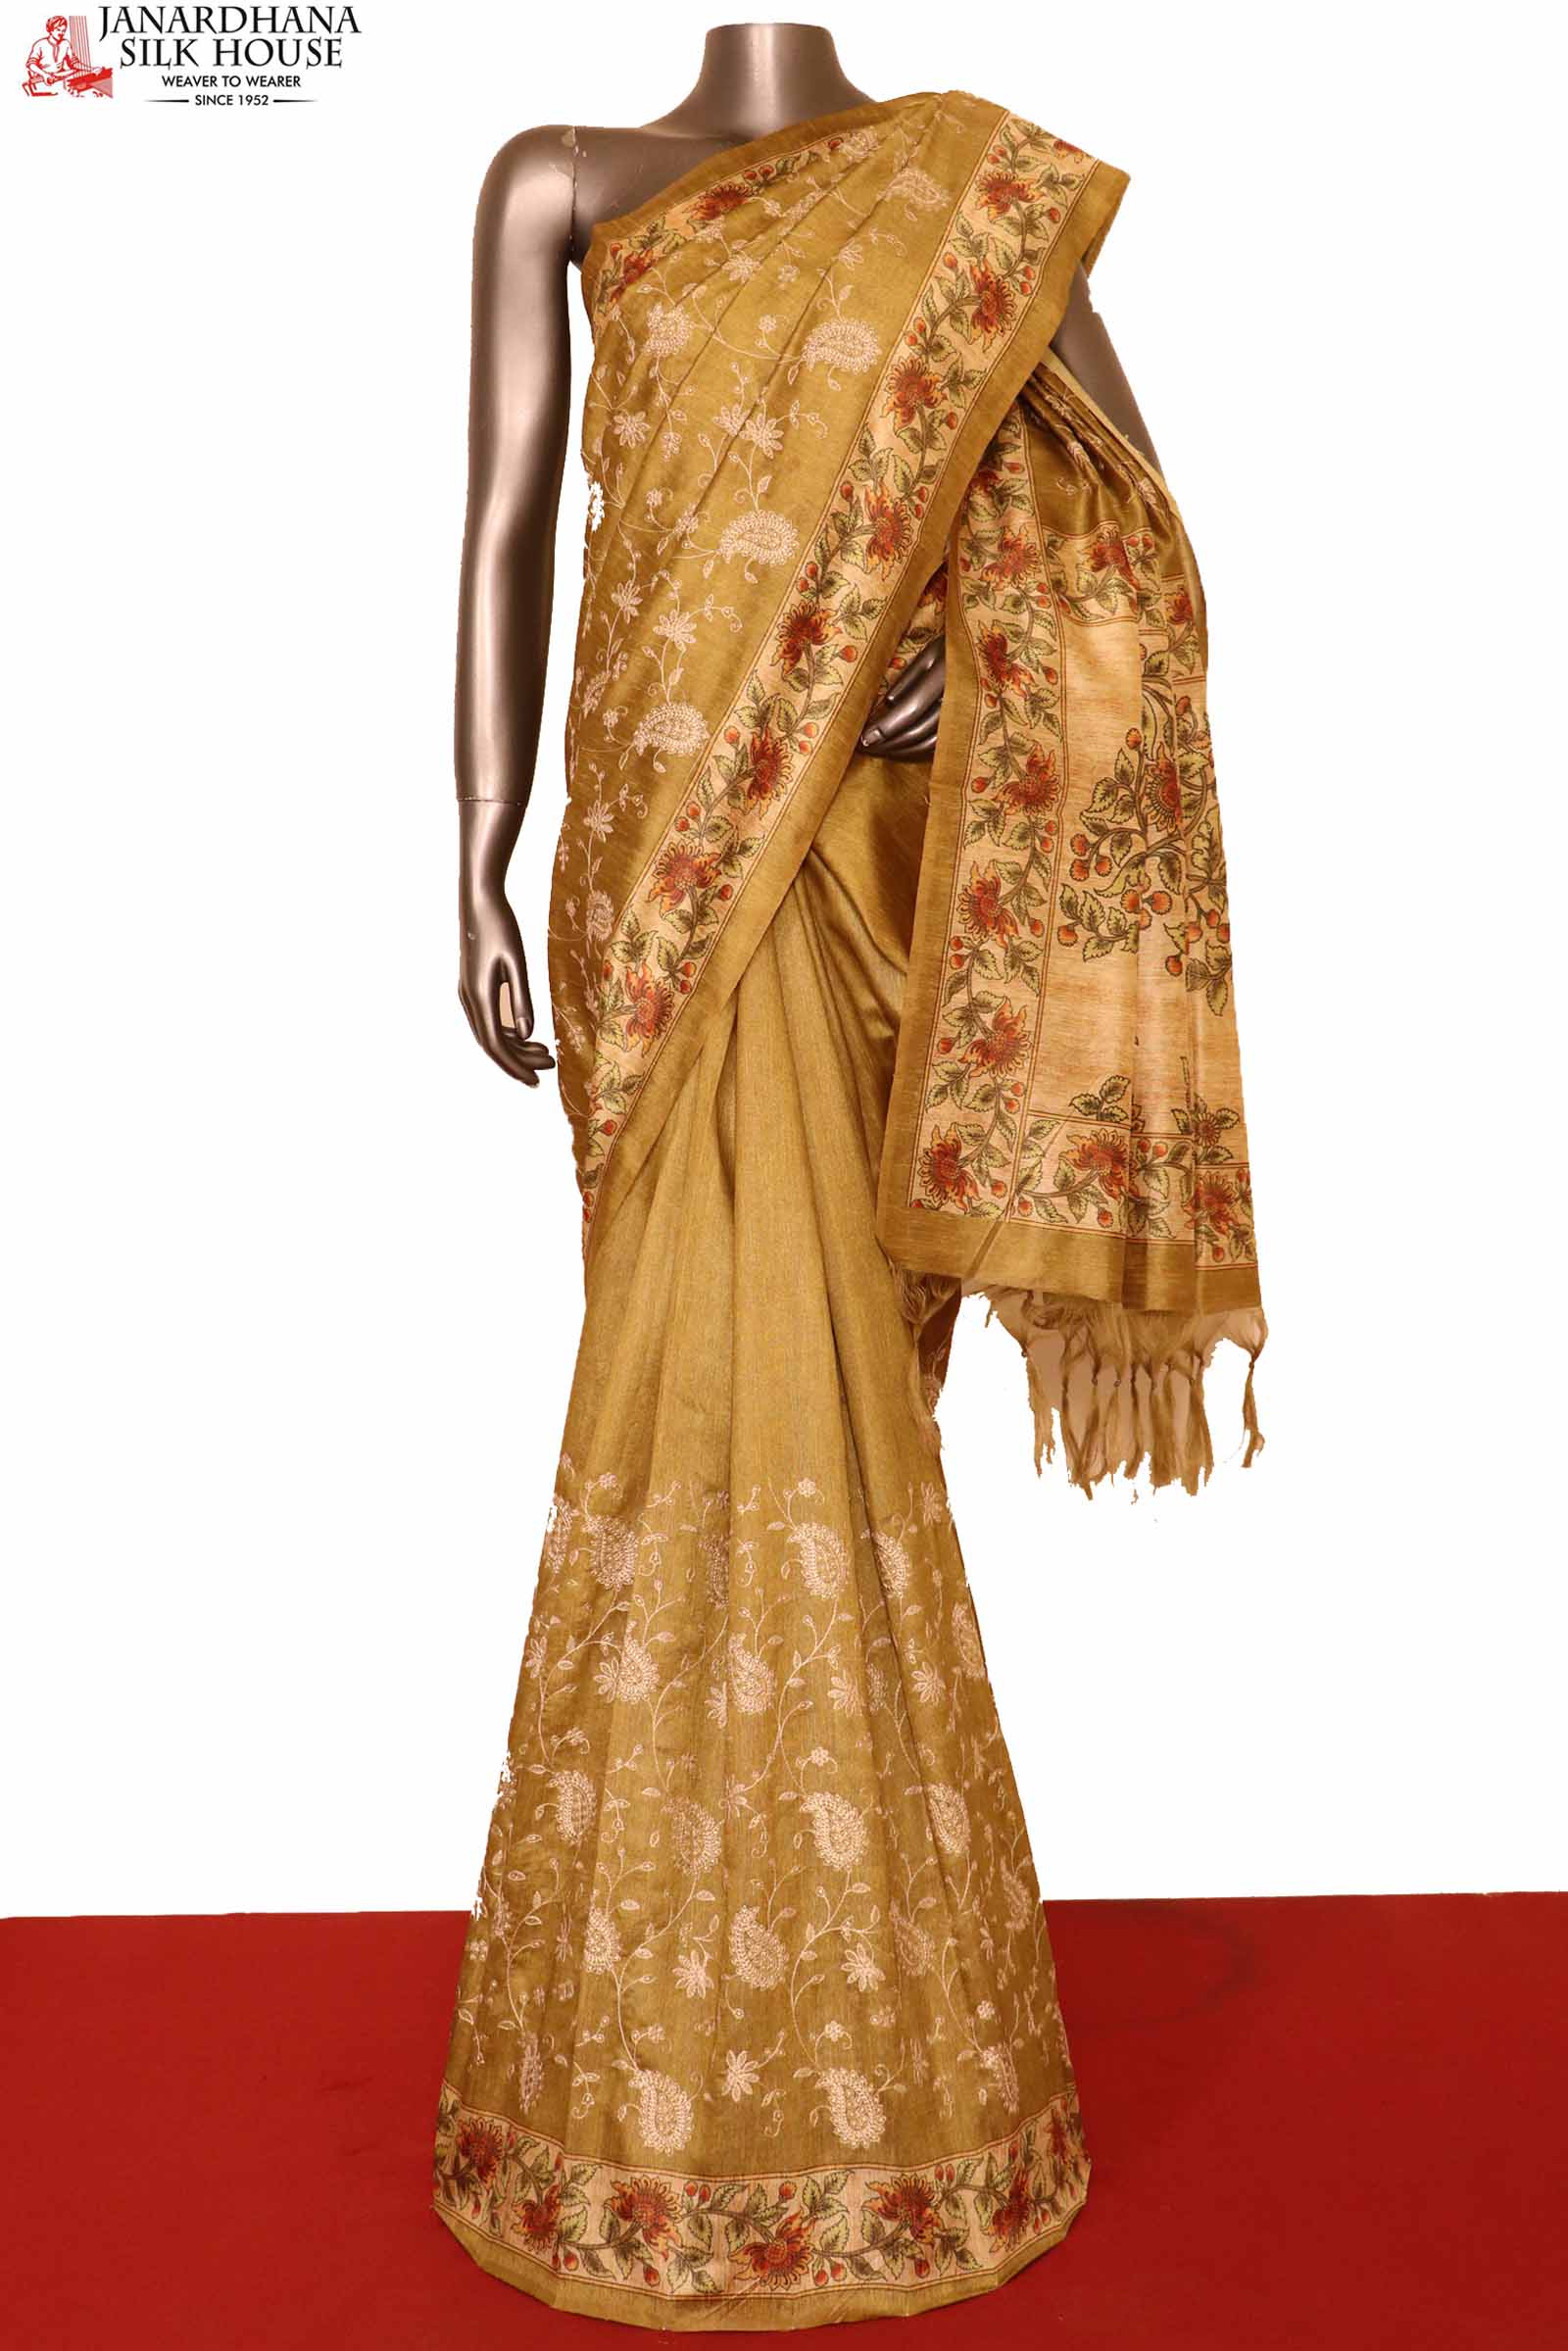 Best stores in hyderabad where i can get best silk(pattu) sarees at a best  price? - Quora